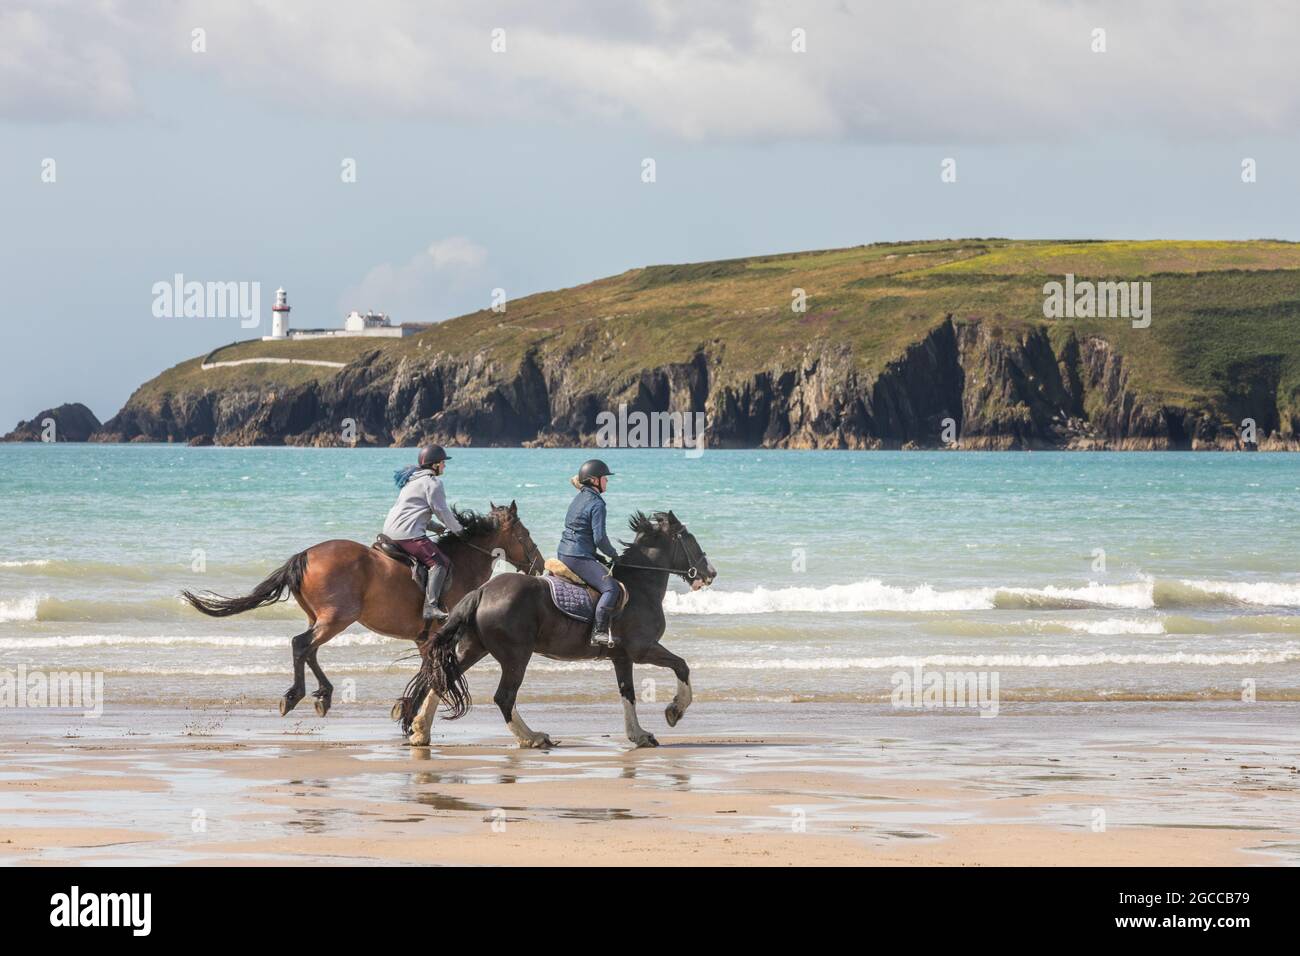 Red Strand, Cork, Ireland. 07th August, 2021.  Lauren Crowley on Esmeralda and Shannon McQueen on Oxbow go for an early morning gallop on Red Strand in West Cork, Ireland. - Picture; David Creedon / Alamy Live News Stock Photo